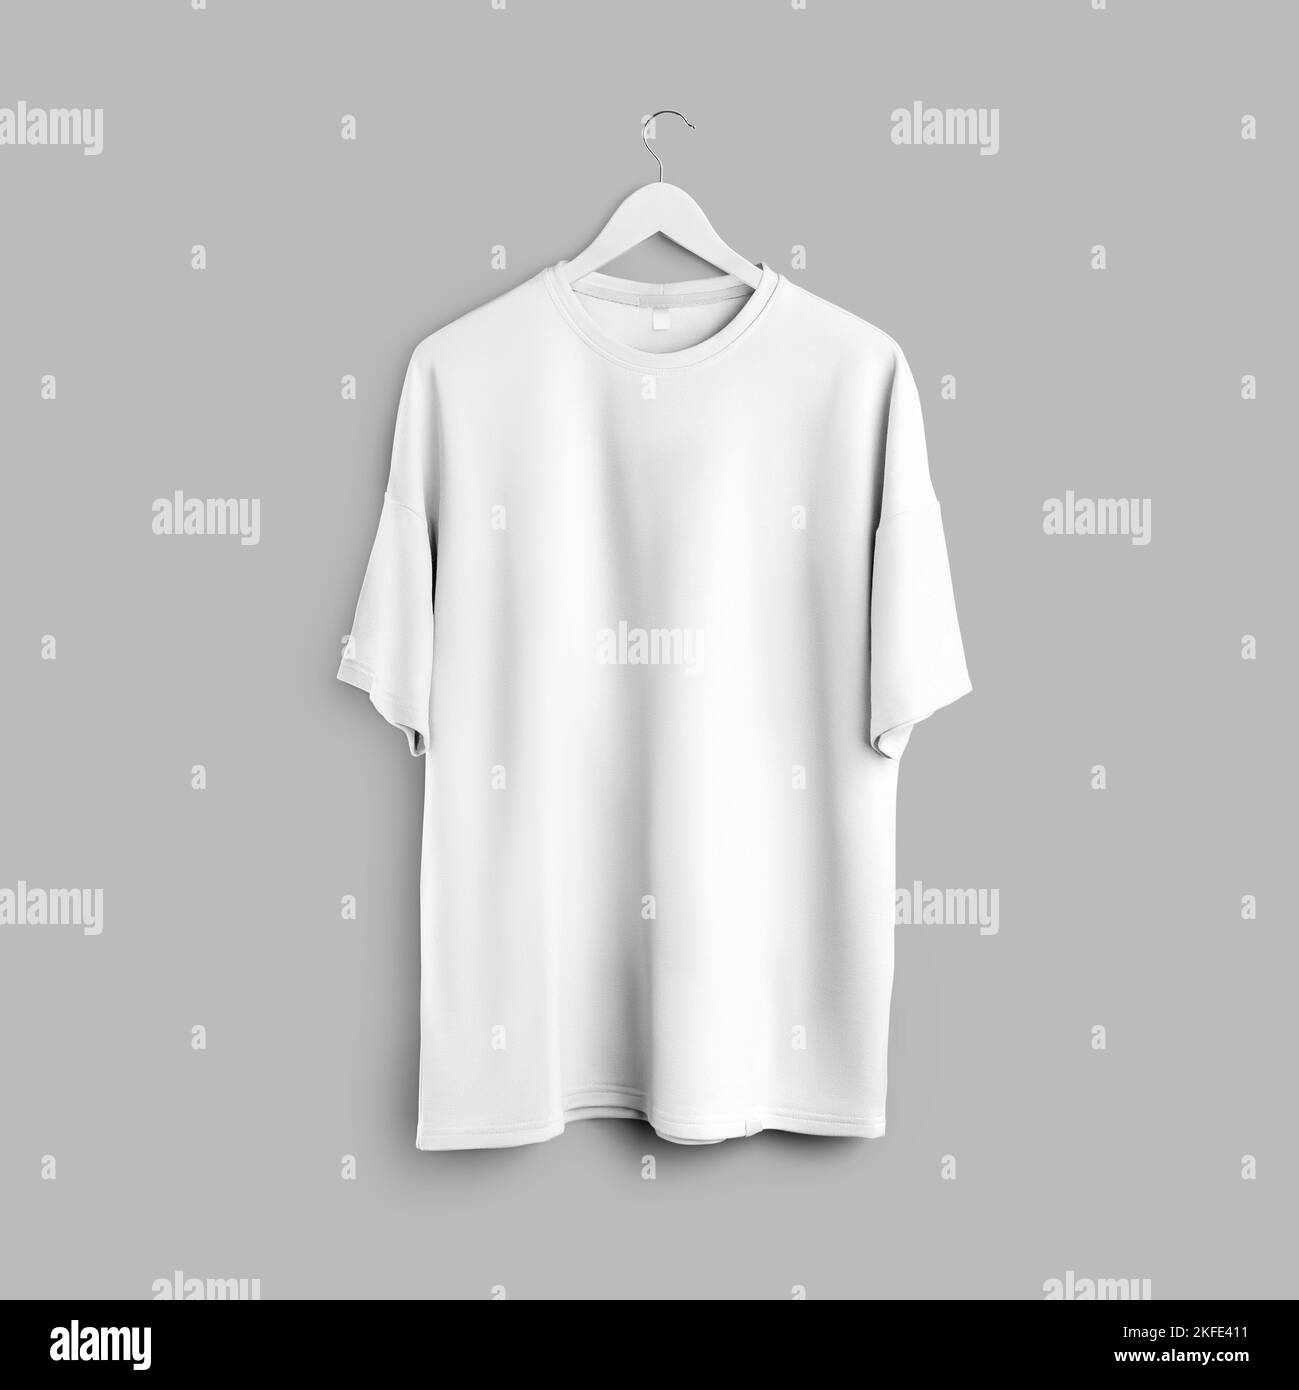 Mockup of white oversized t-shirt with round neckline hanging on hanger isolated on background, front view. Template of stylish apparel for men, women Stock Photo